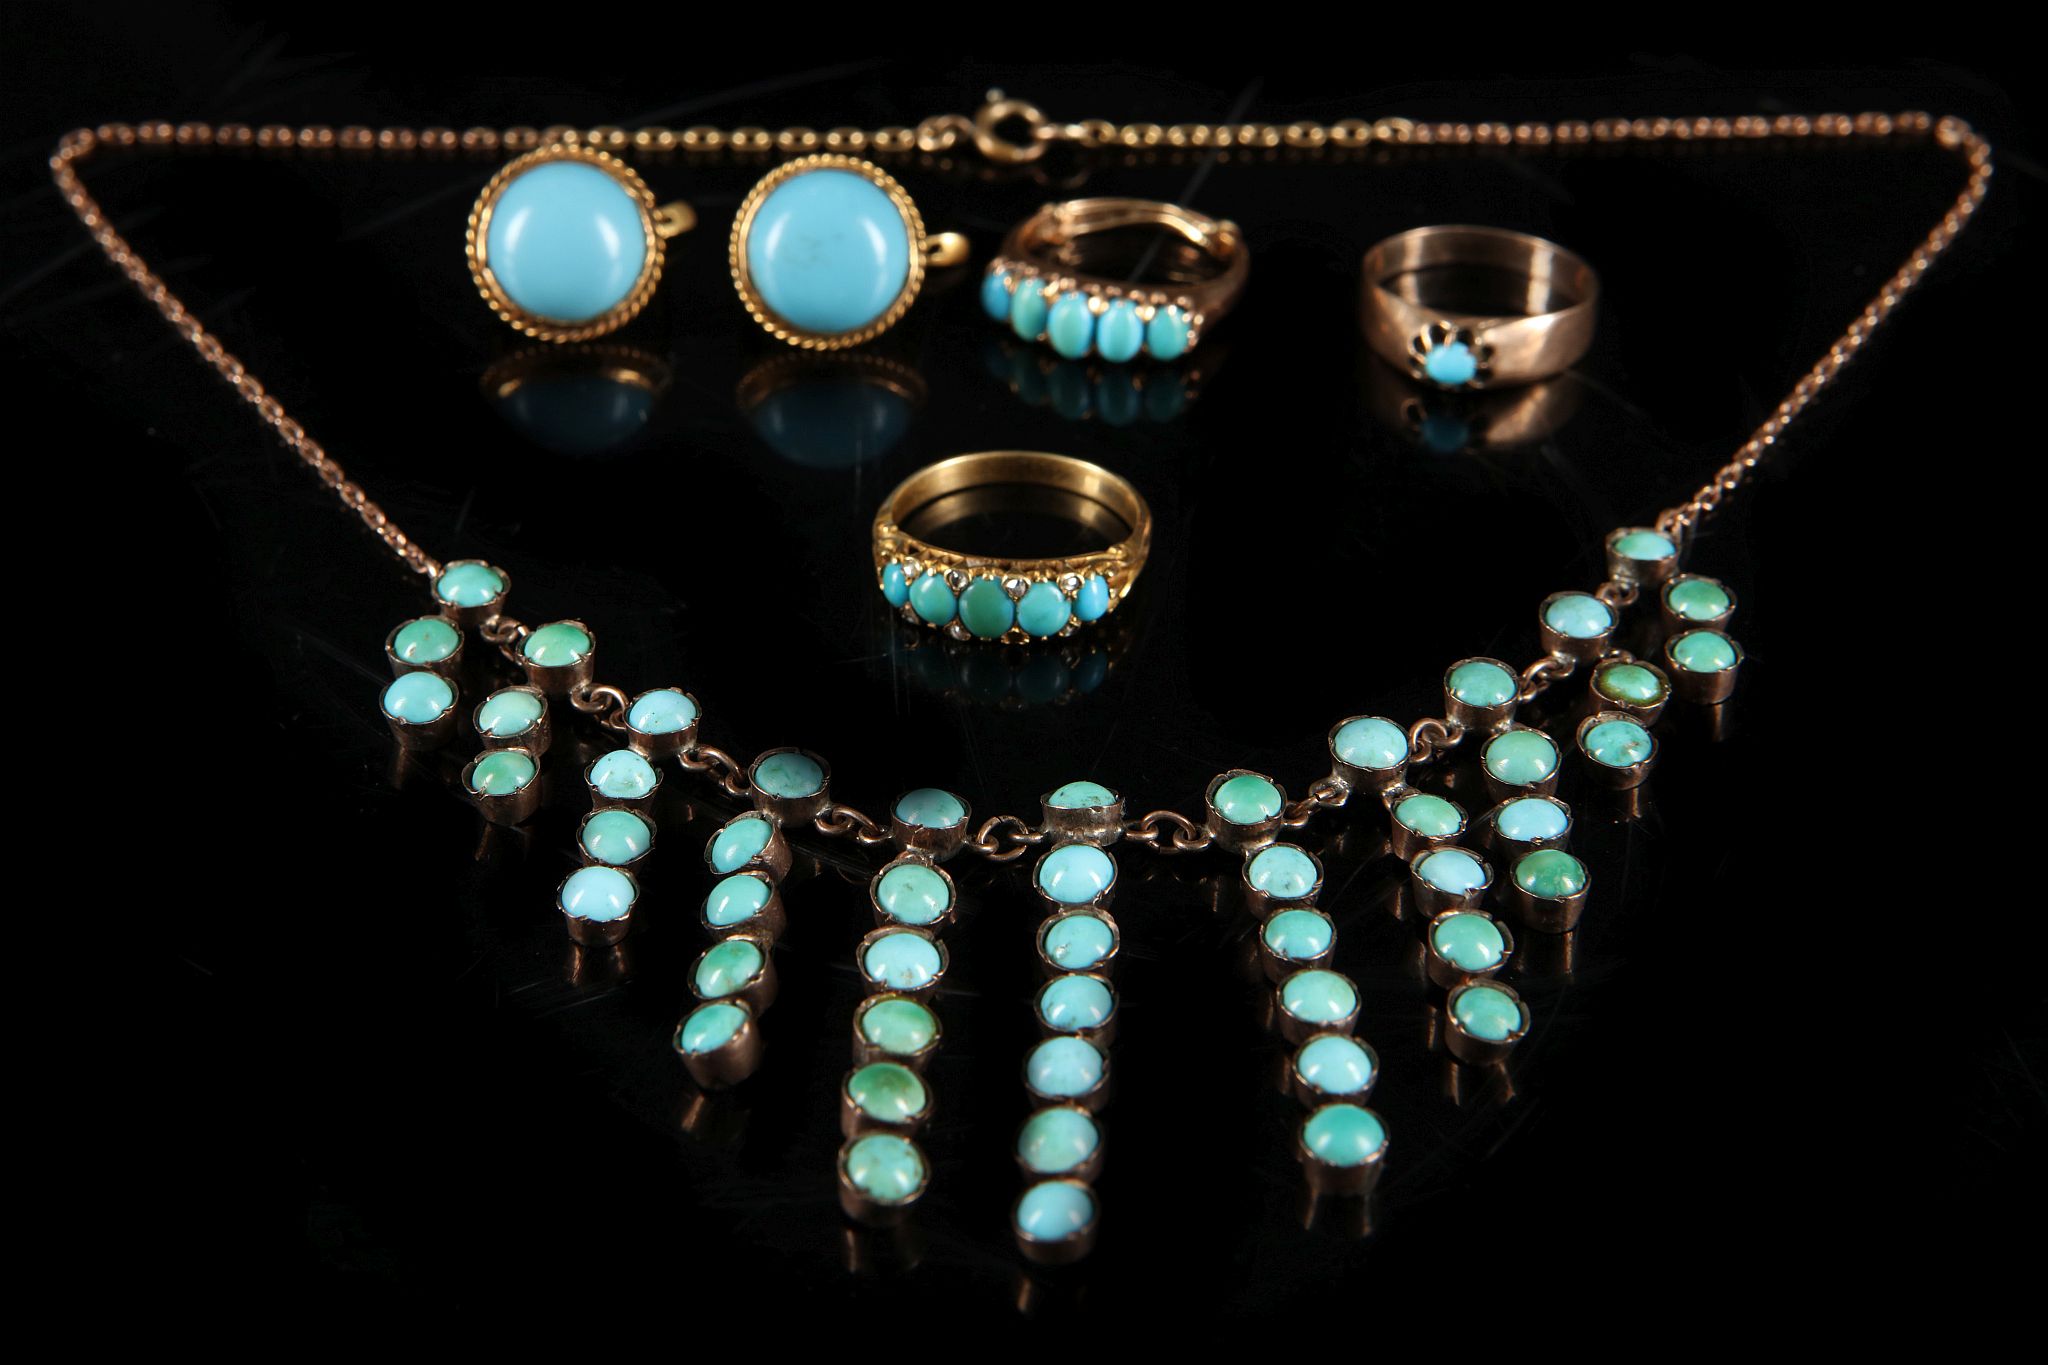 A pair of 14k gold and turquoise cabouchon button earrings, together with two 14k gold and turquoise